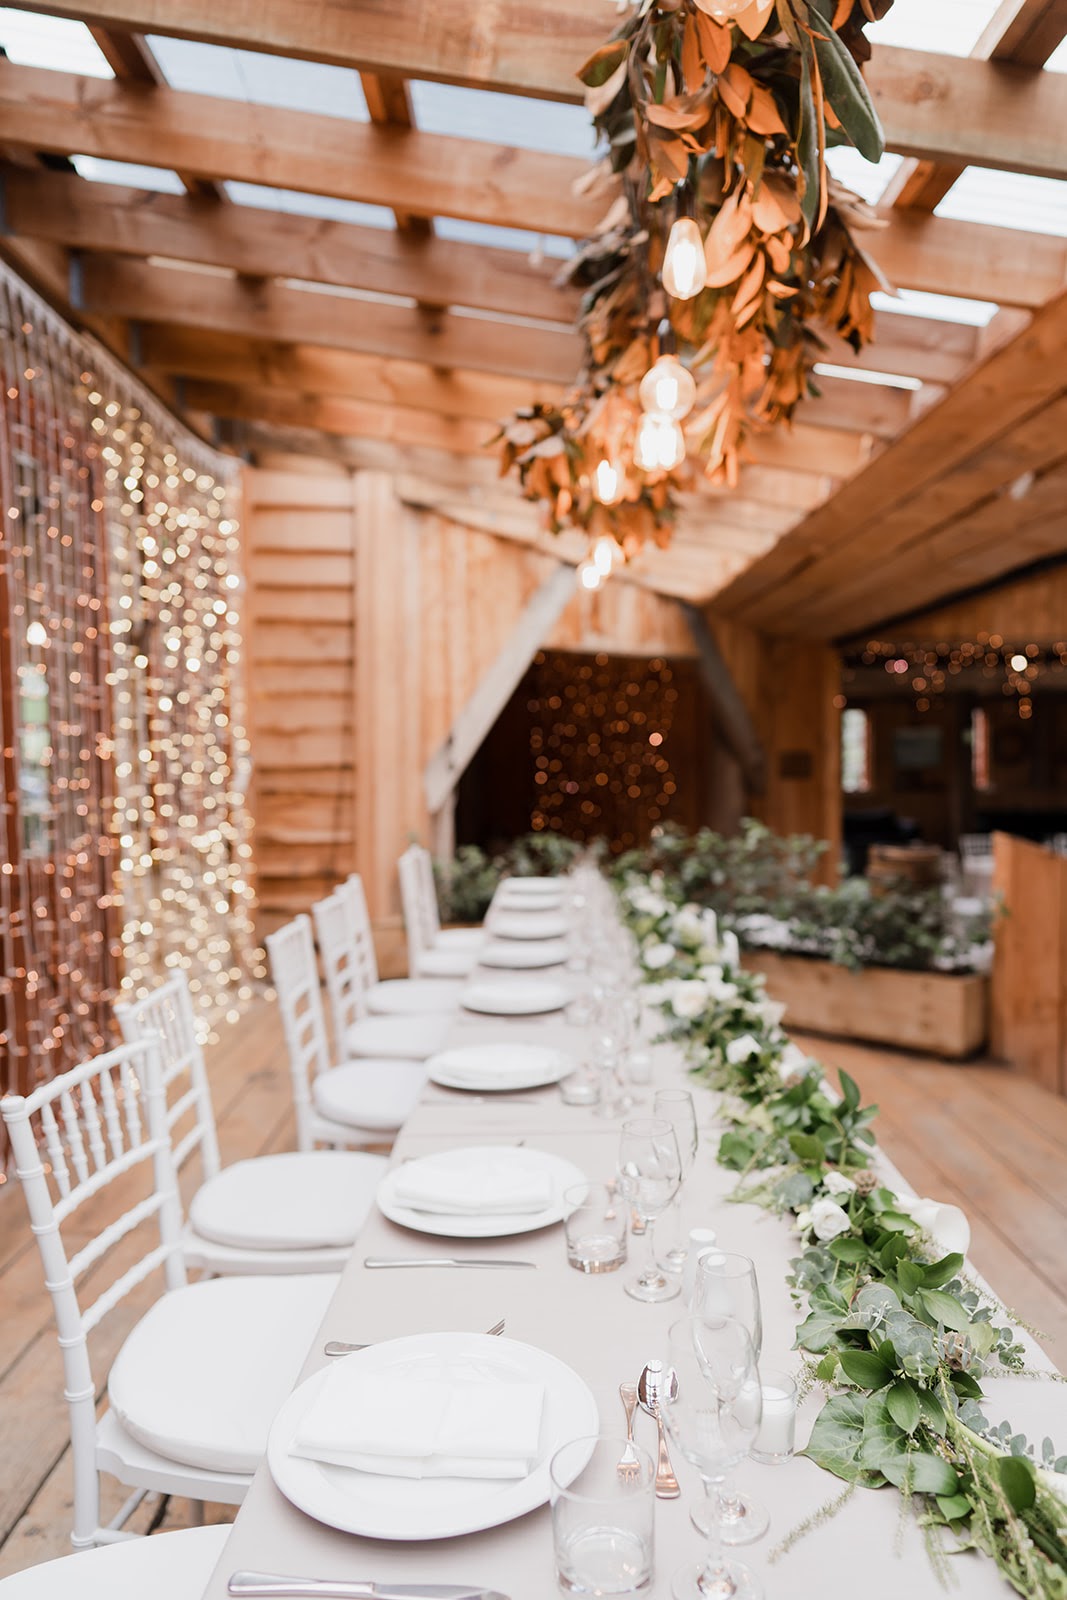 BRIDAL_TABLE_AT_WEDDING_INSIDE_BARN_WITH_GREEN_FLORAL_TABLE_SETTING